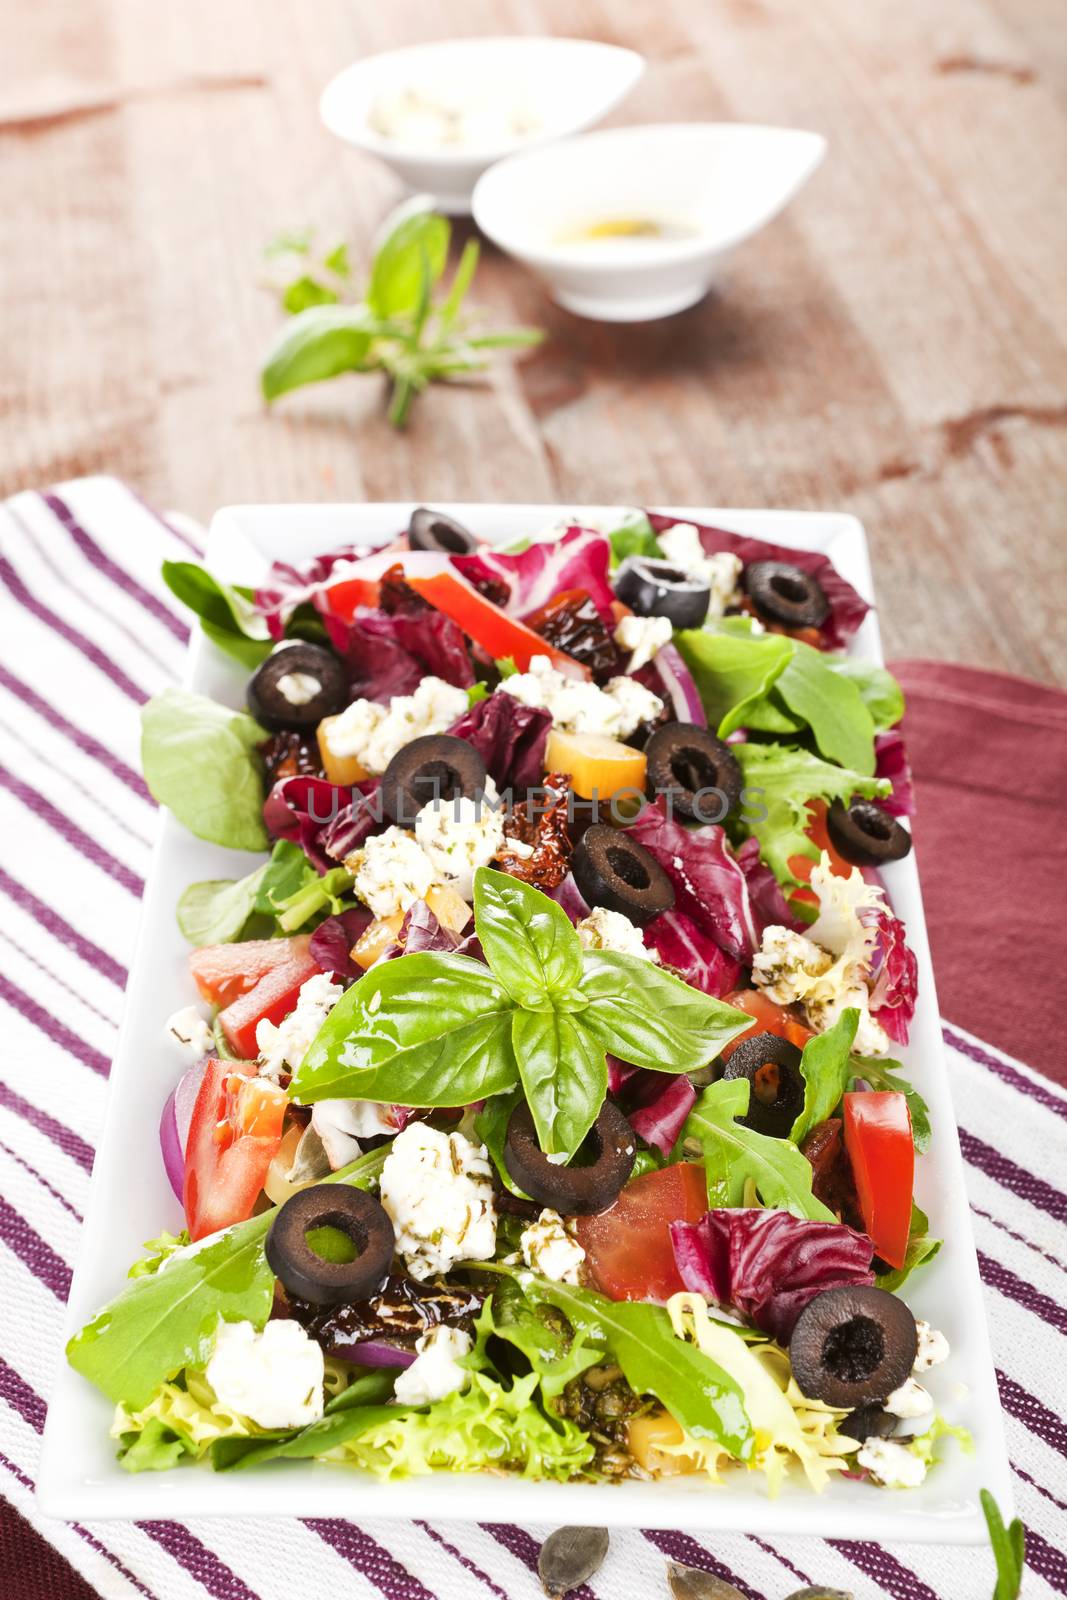 Colorful fresh salad with feta, goat cheese, olives, tomatoes and arugula.